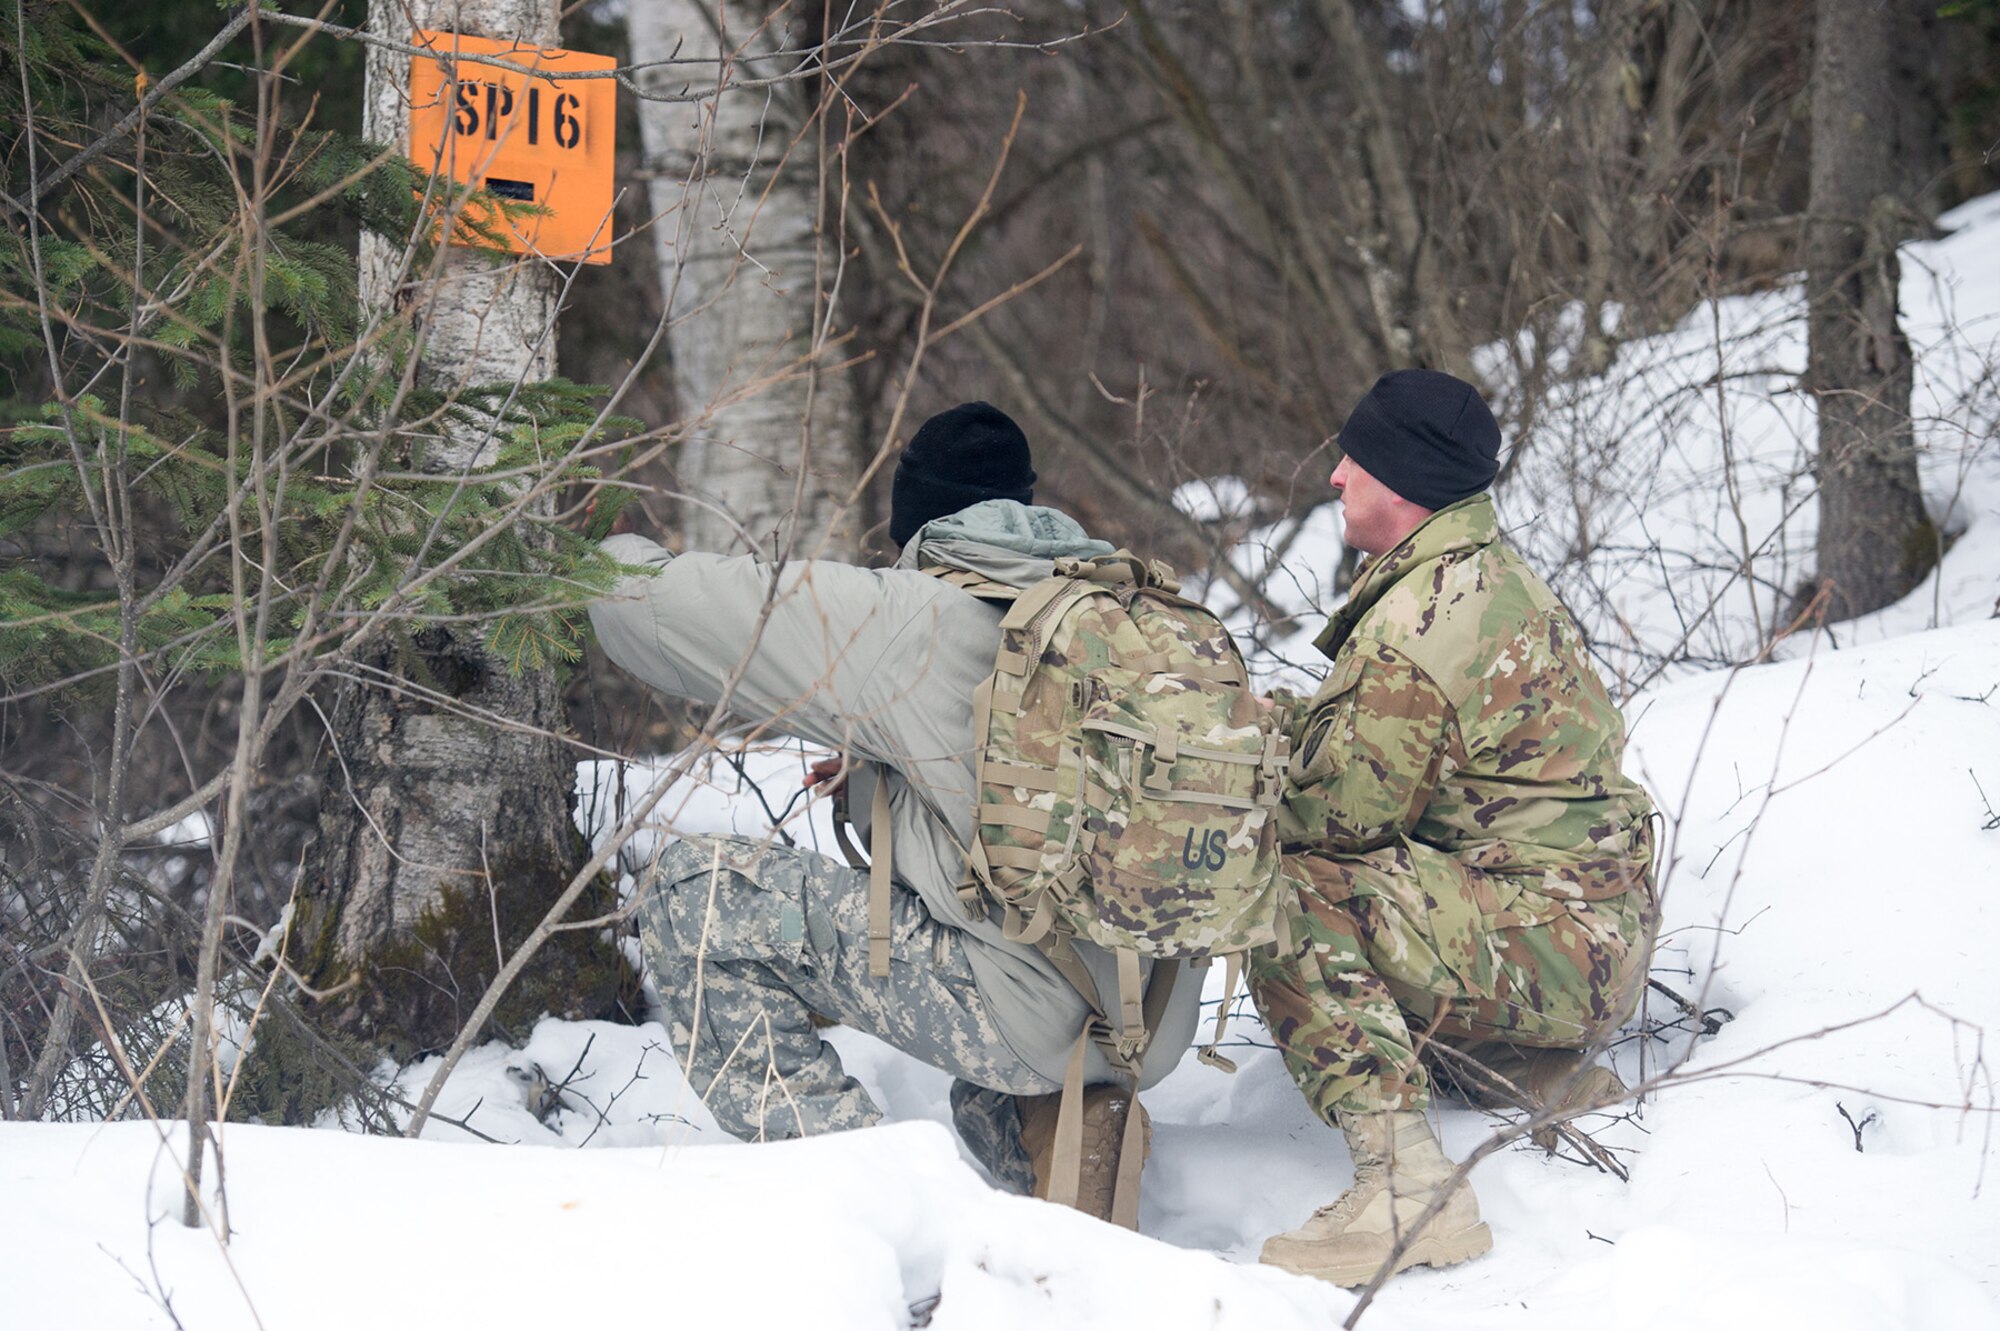 Paratroopers assigned to the 4th Infantry Brigade Combat Team (Airborne), 25th Infantry Division, U.S. Army Alaska, conduct a land navigation course on Joint Base Elmendorf-Richardson, Alaska, April 4, 2018.  The Soldiers used their skills to plot courses using a lensatic compass, protractor, and a 1:25,000 scale map to navigate to, and locate points using provided grid coordinates within a predetermined time.